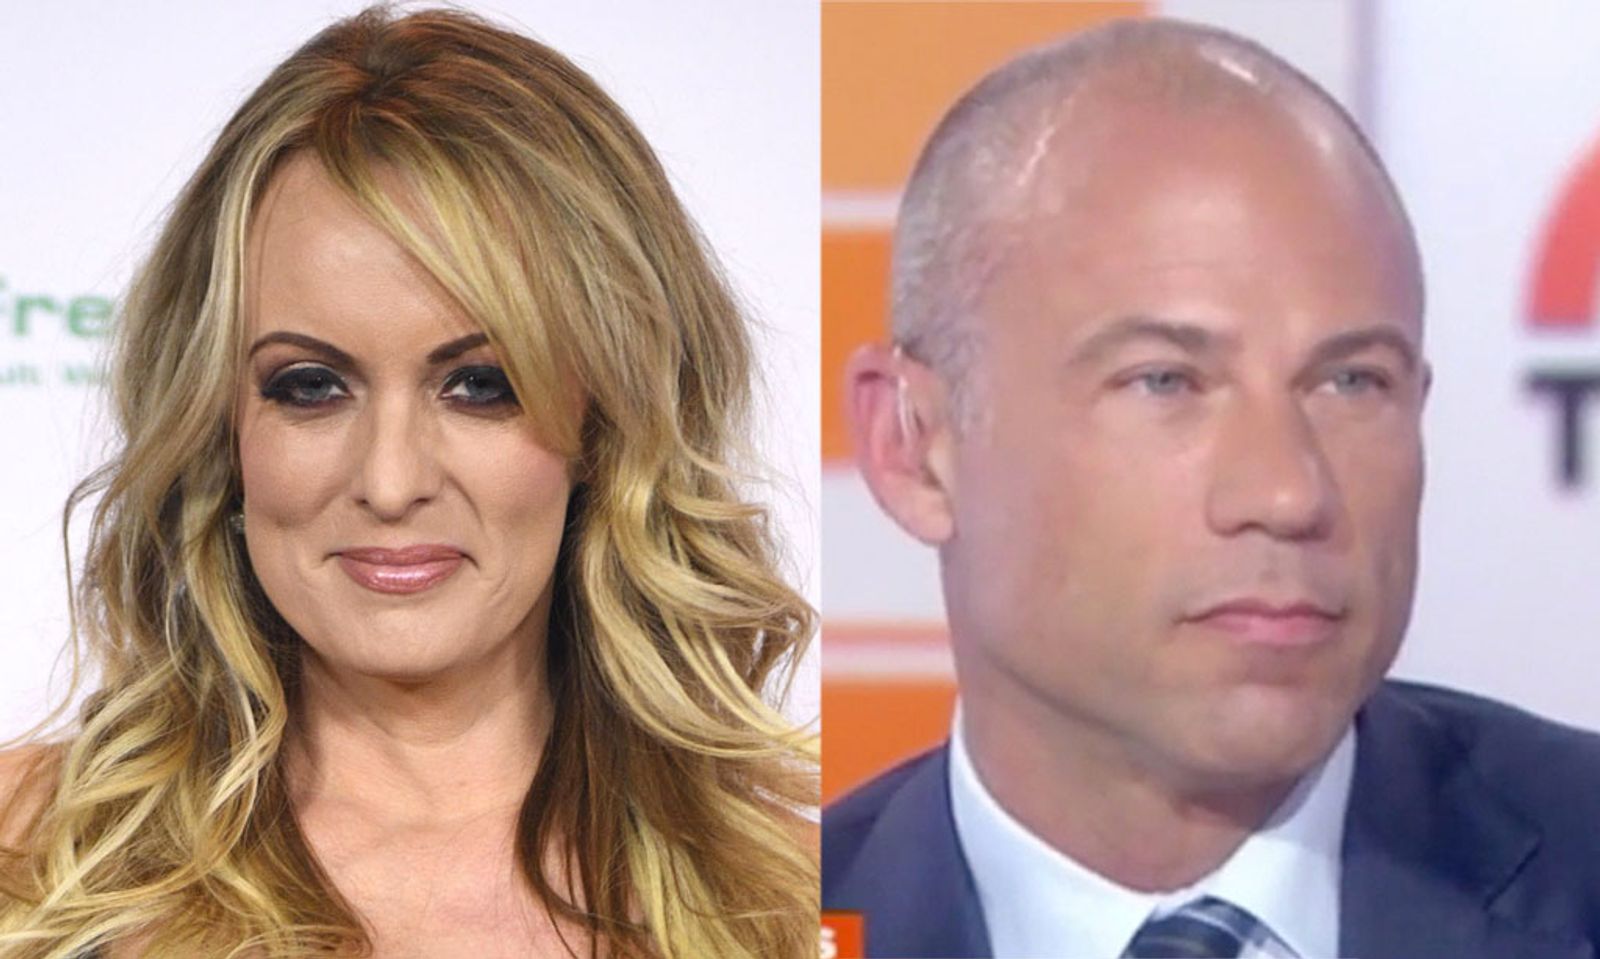 Stormy Daniels Lawyer Asks Court to Grill Trump Under Oath